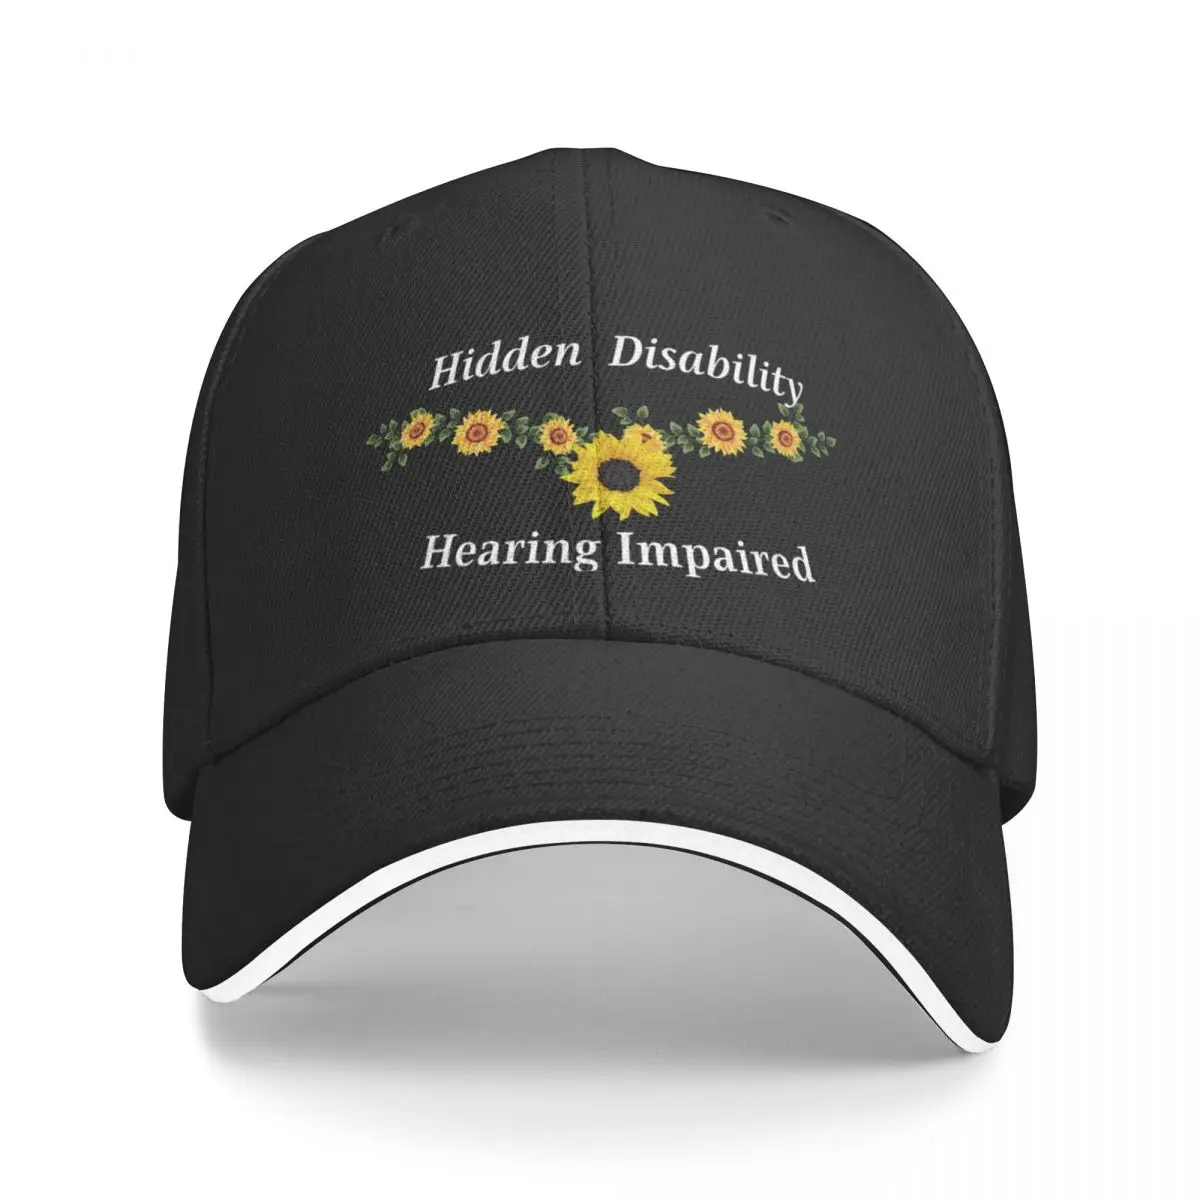 

Baseball Hat For Men Women Deaf And Hearing Impaired And Invisible Hidden Disability Assistance Sunflower Logo Caps Male Cap